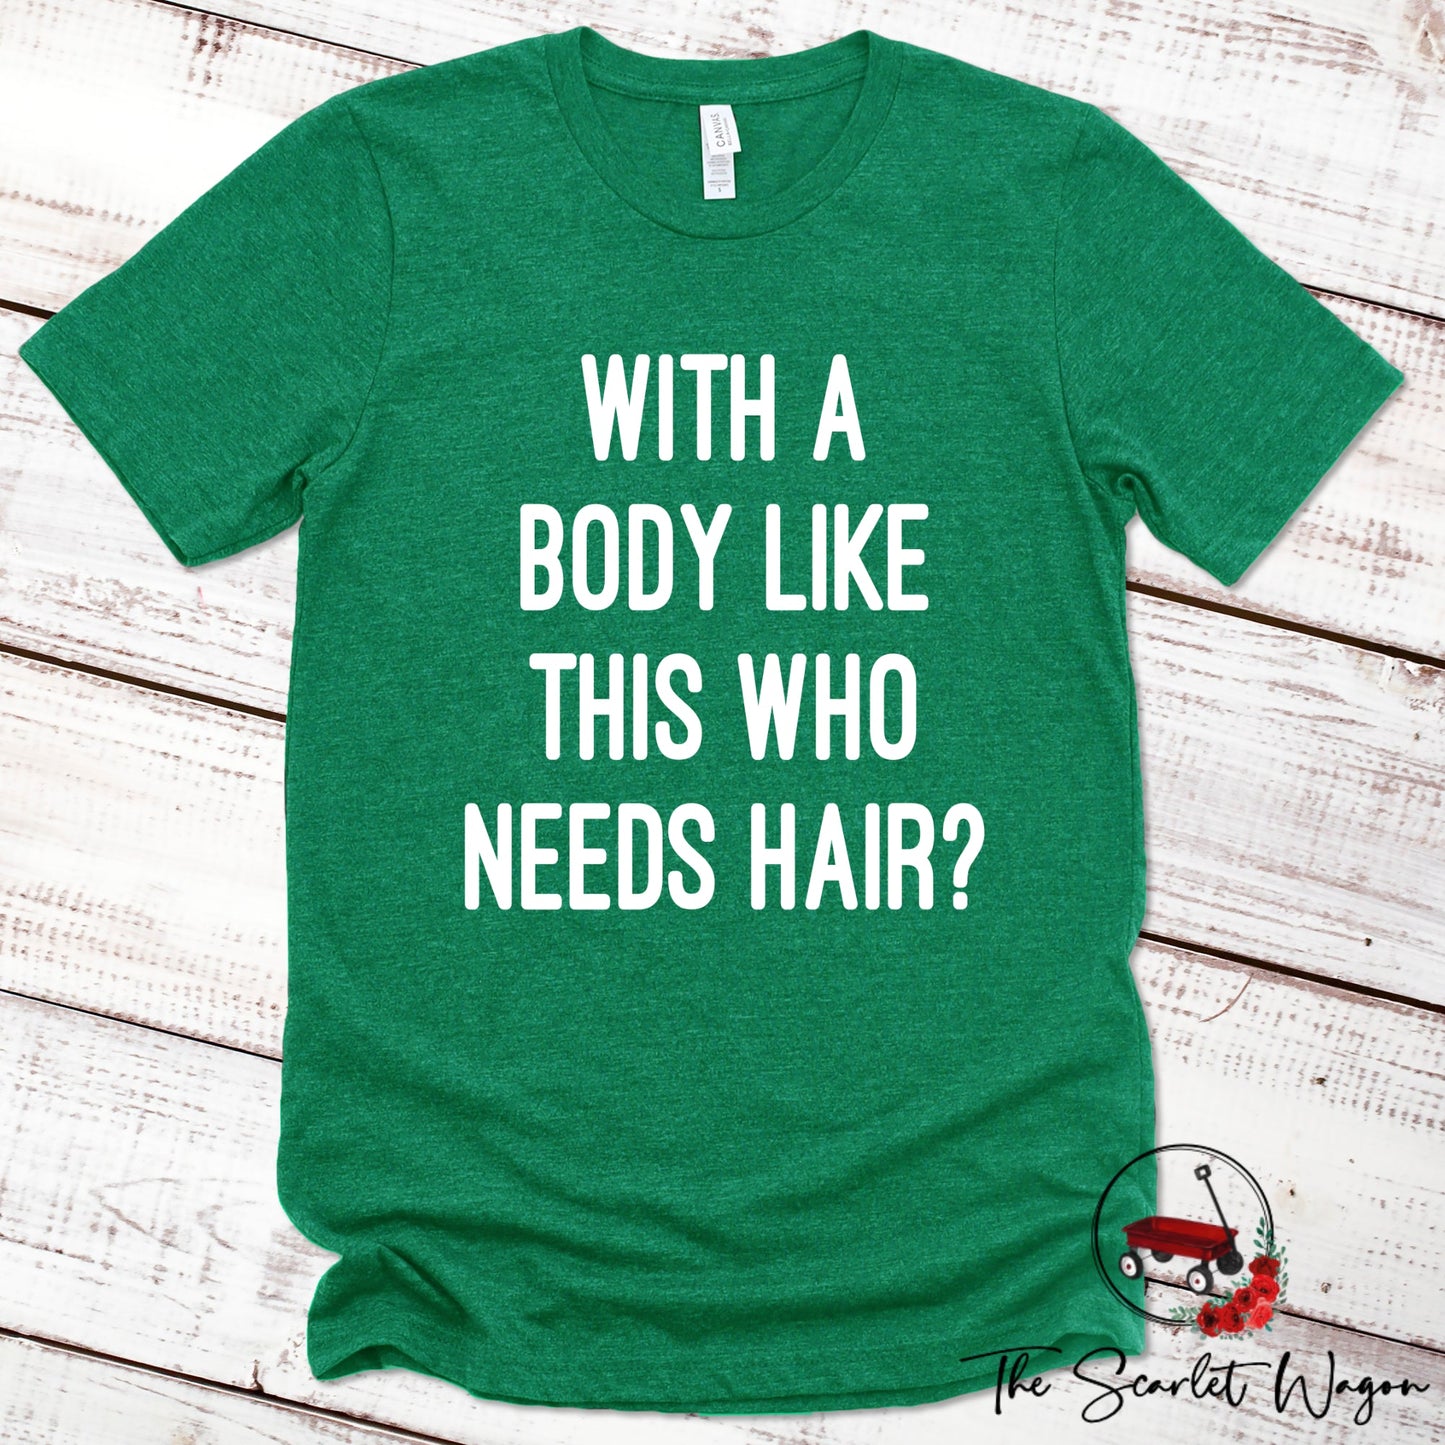 With a Body Like This Who Needs Hair Premium Tee Scarlet Wagon Heather Green XS 